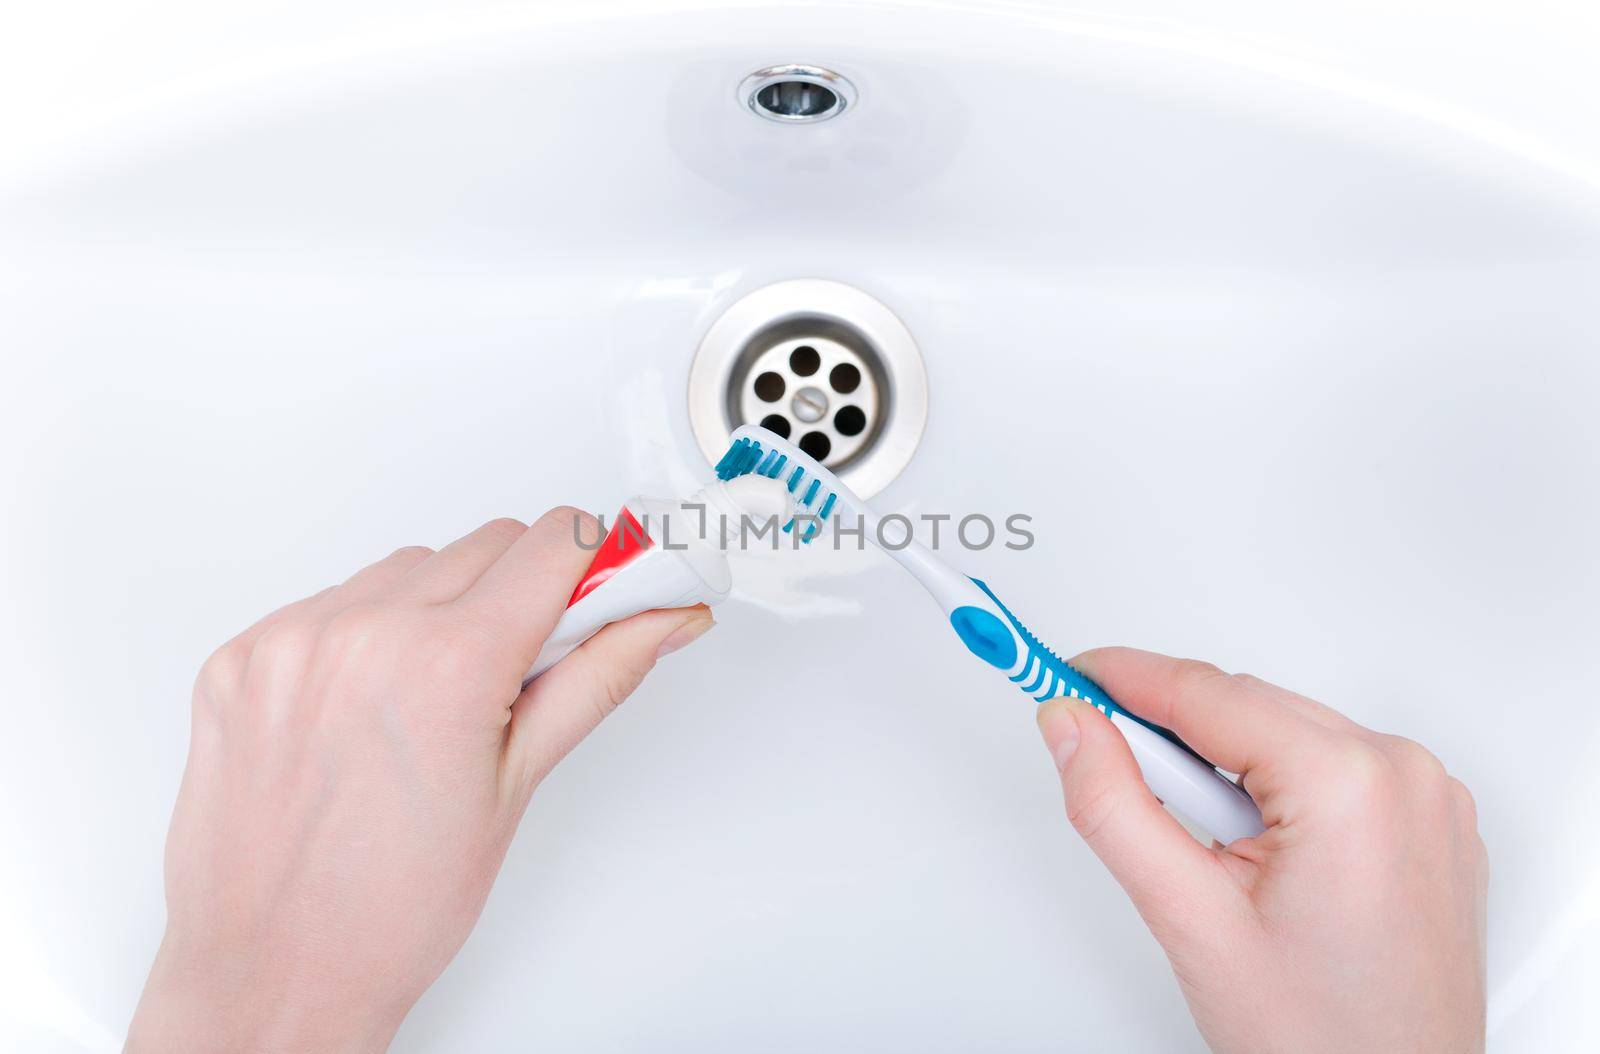 brushing your teeth in the sink with a toothbrush